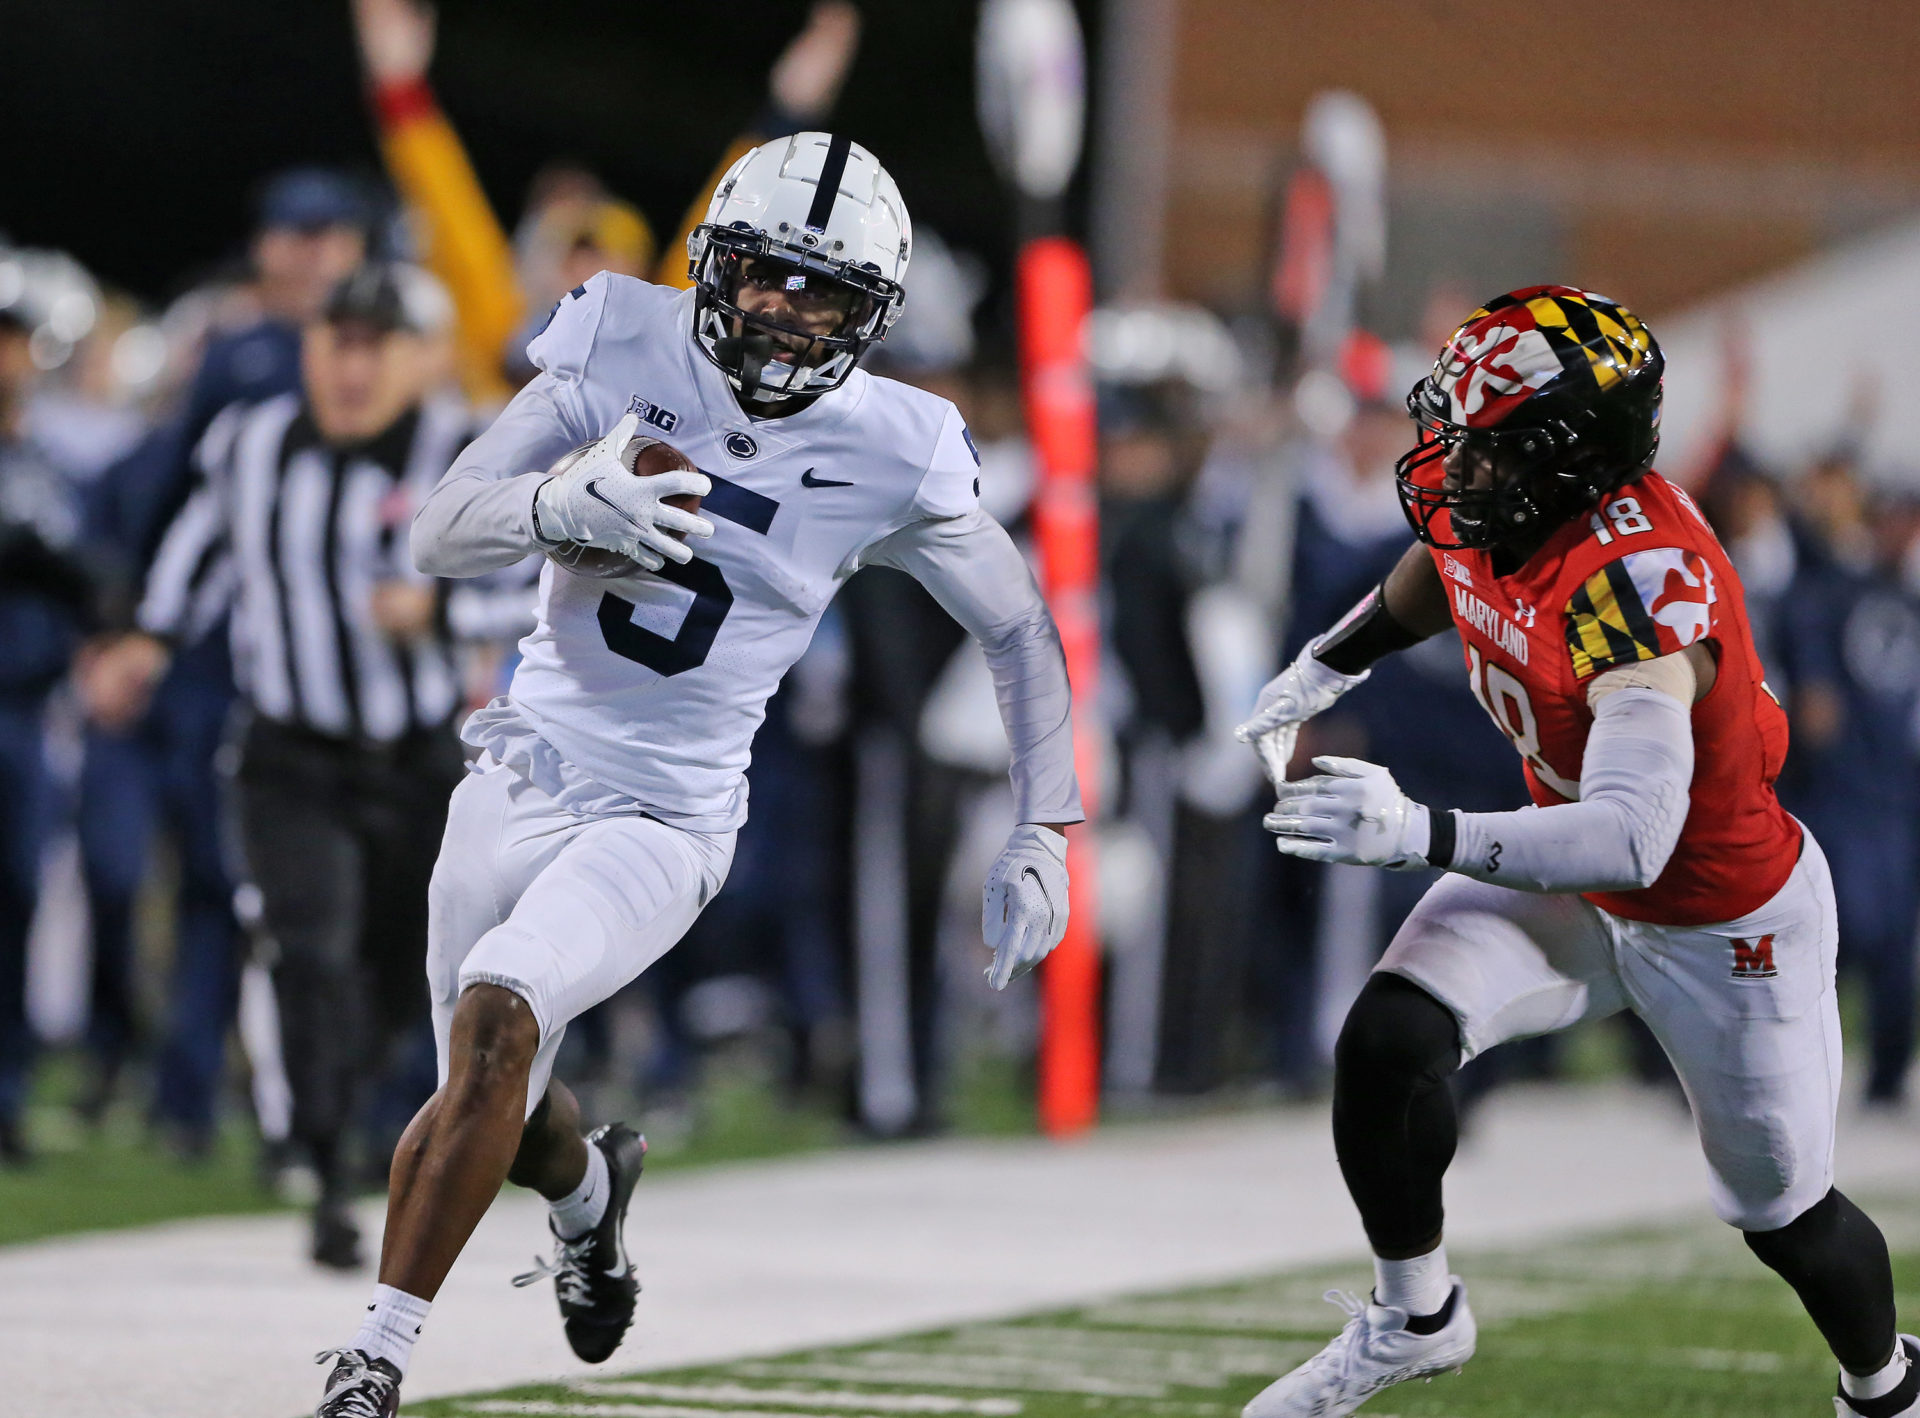 Penn State's Jahan Dotson, Arnold Ebiketie picked in NFL draft